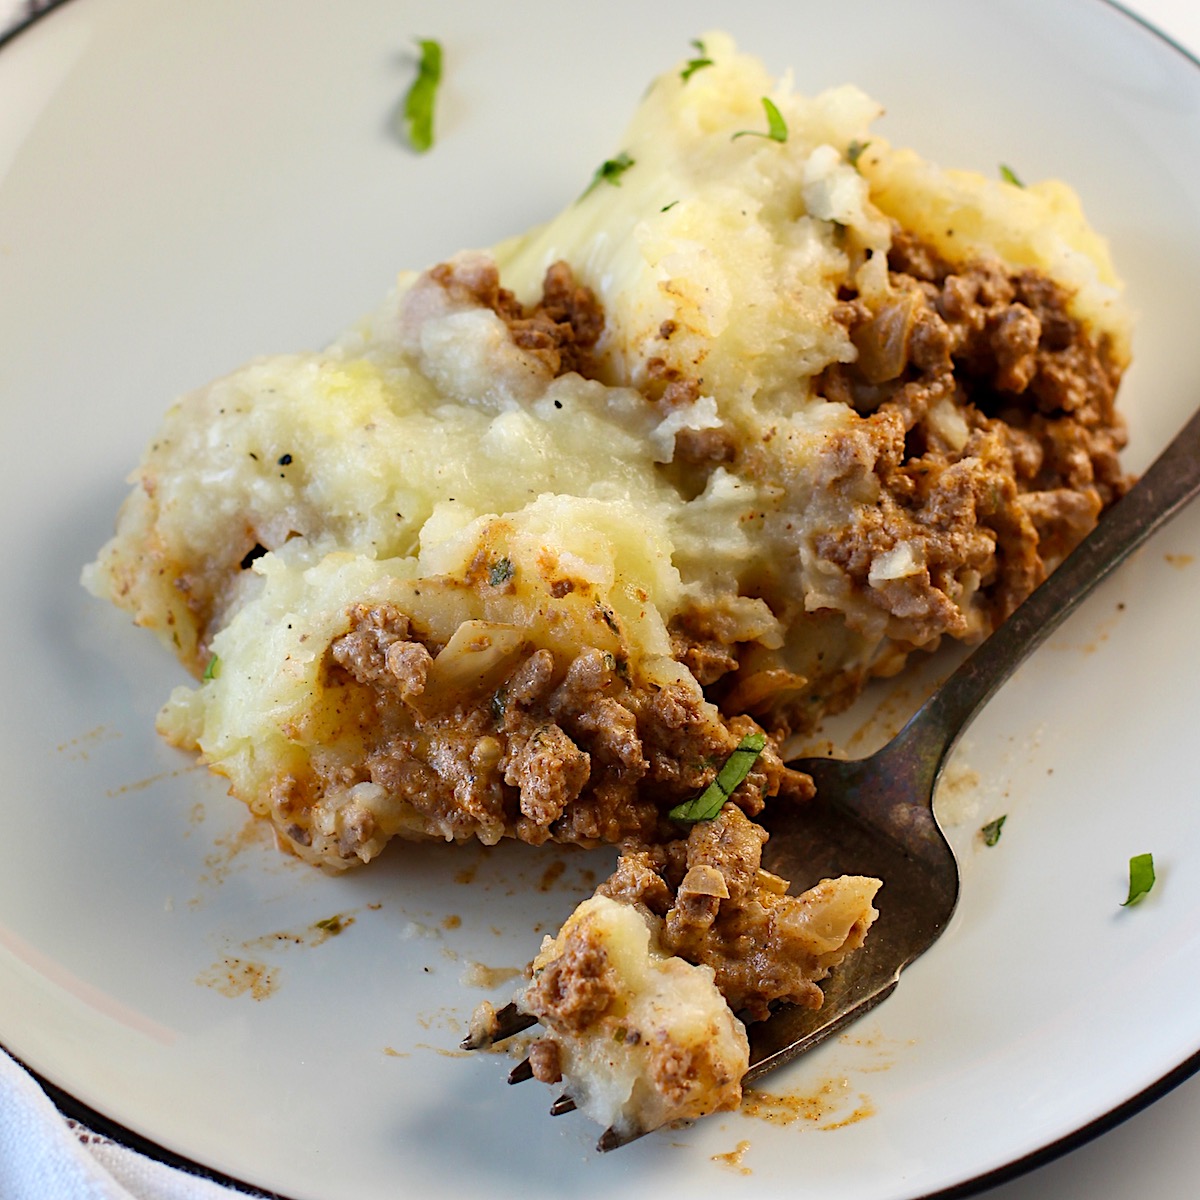 Piece of Dutch oven shepherd's pie with ground beef filling topped with mashed potatoes on a plate with fork laying down with a bite.